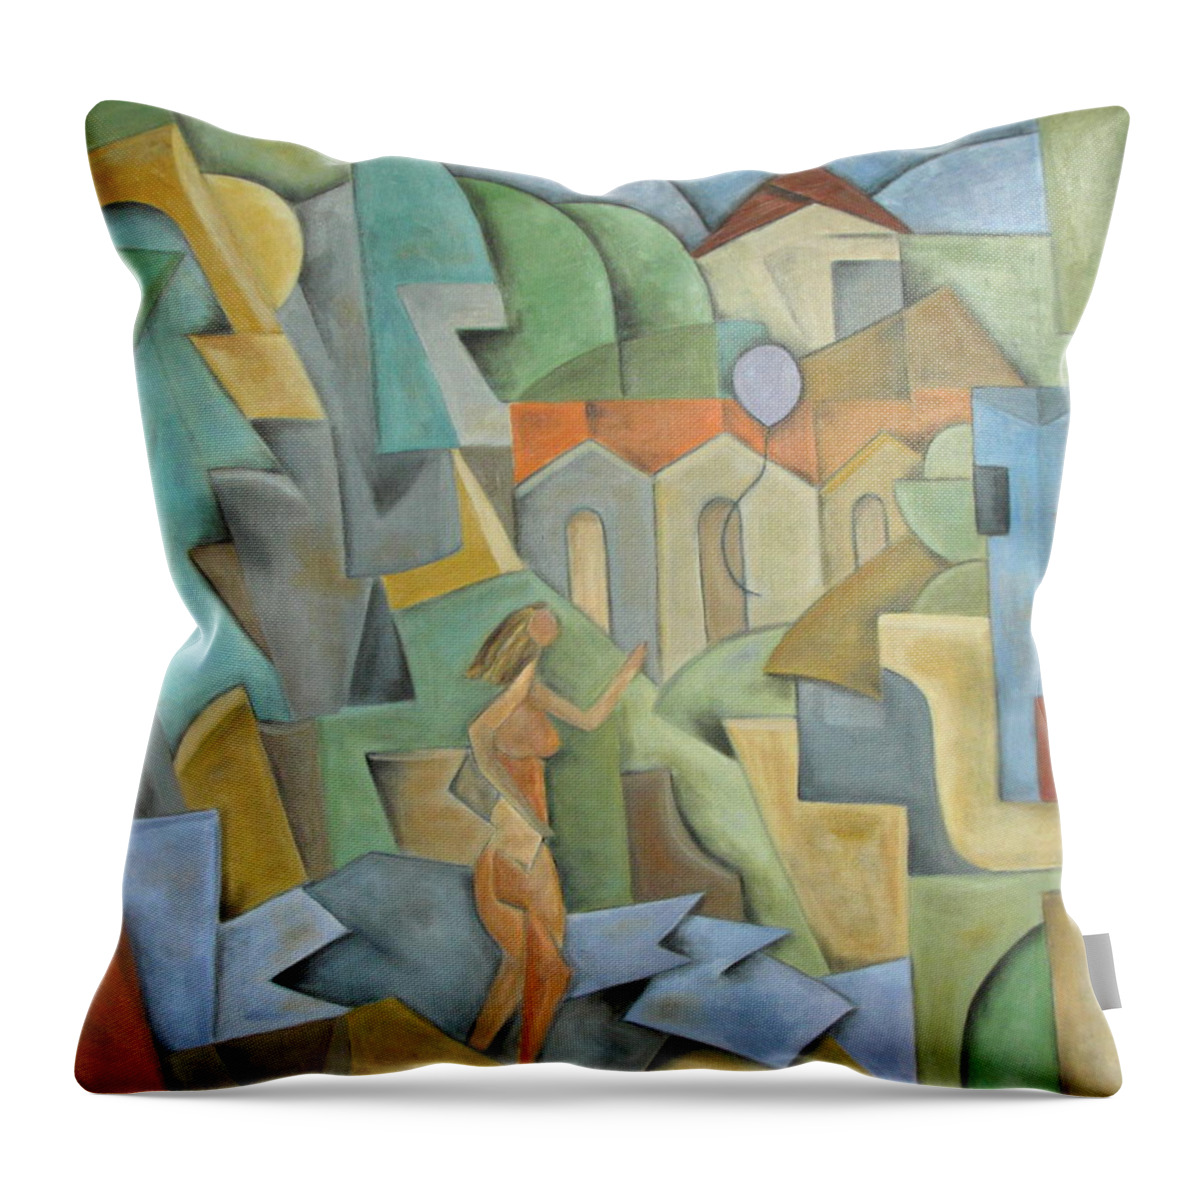 Cubism Throw Pillow featuring the painting Inception by Trish Toro